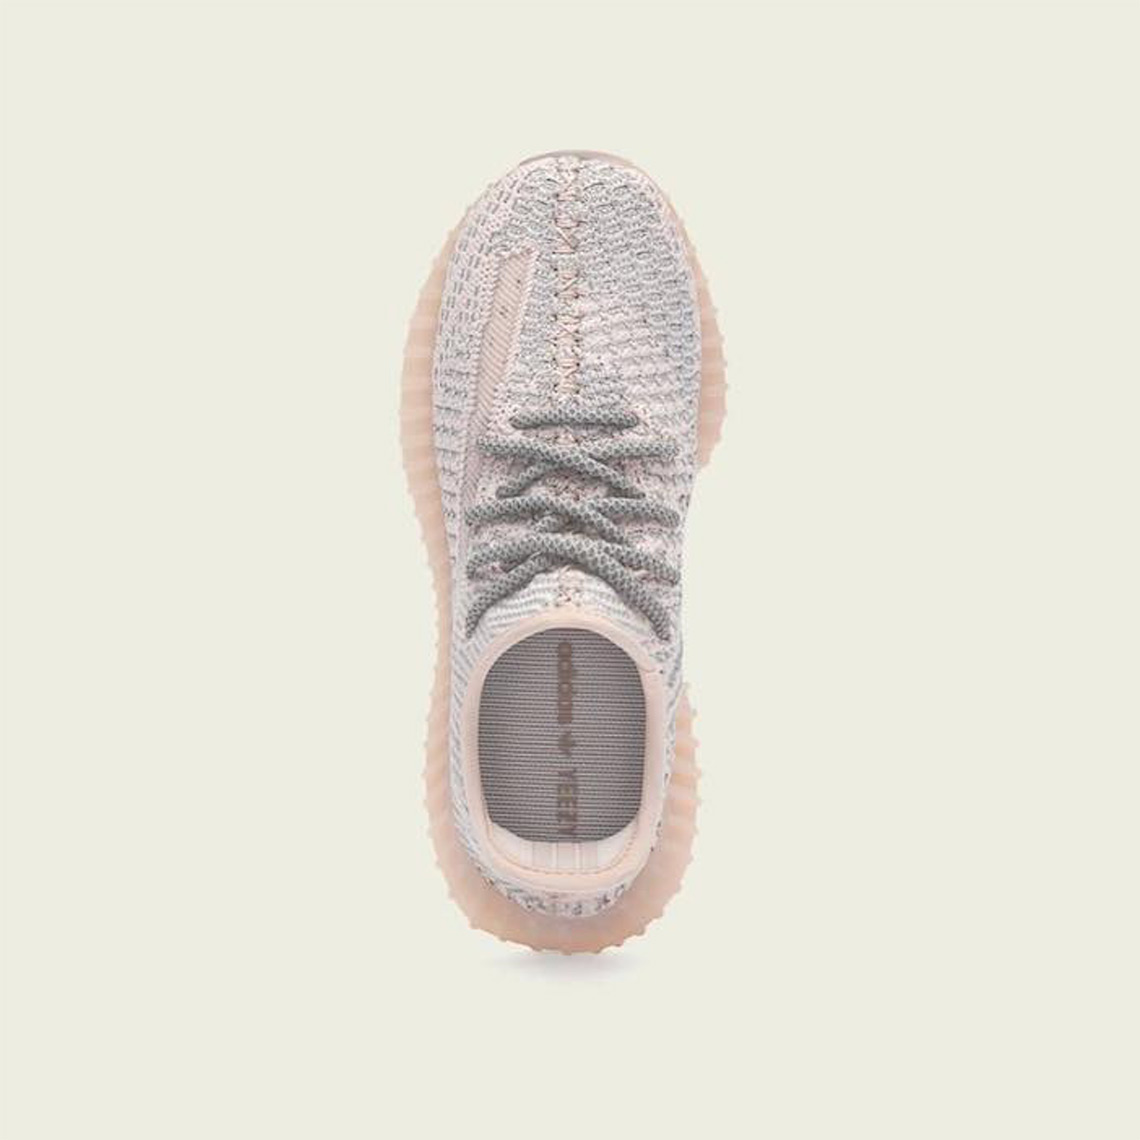 yeezy 350 v2 synth release date